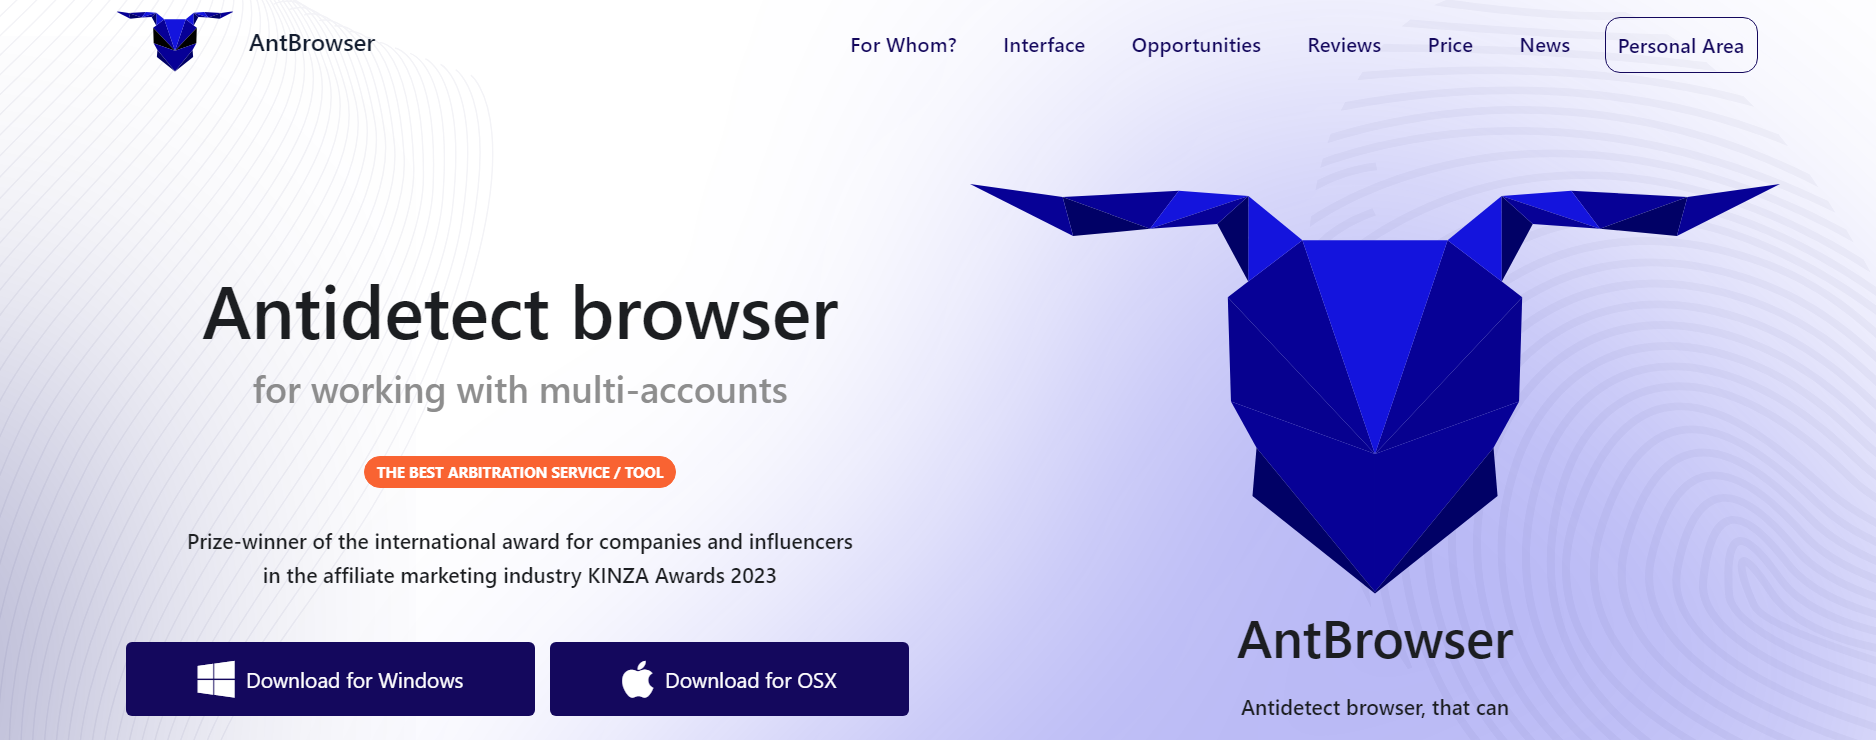 Ant Browser